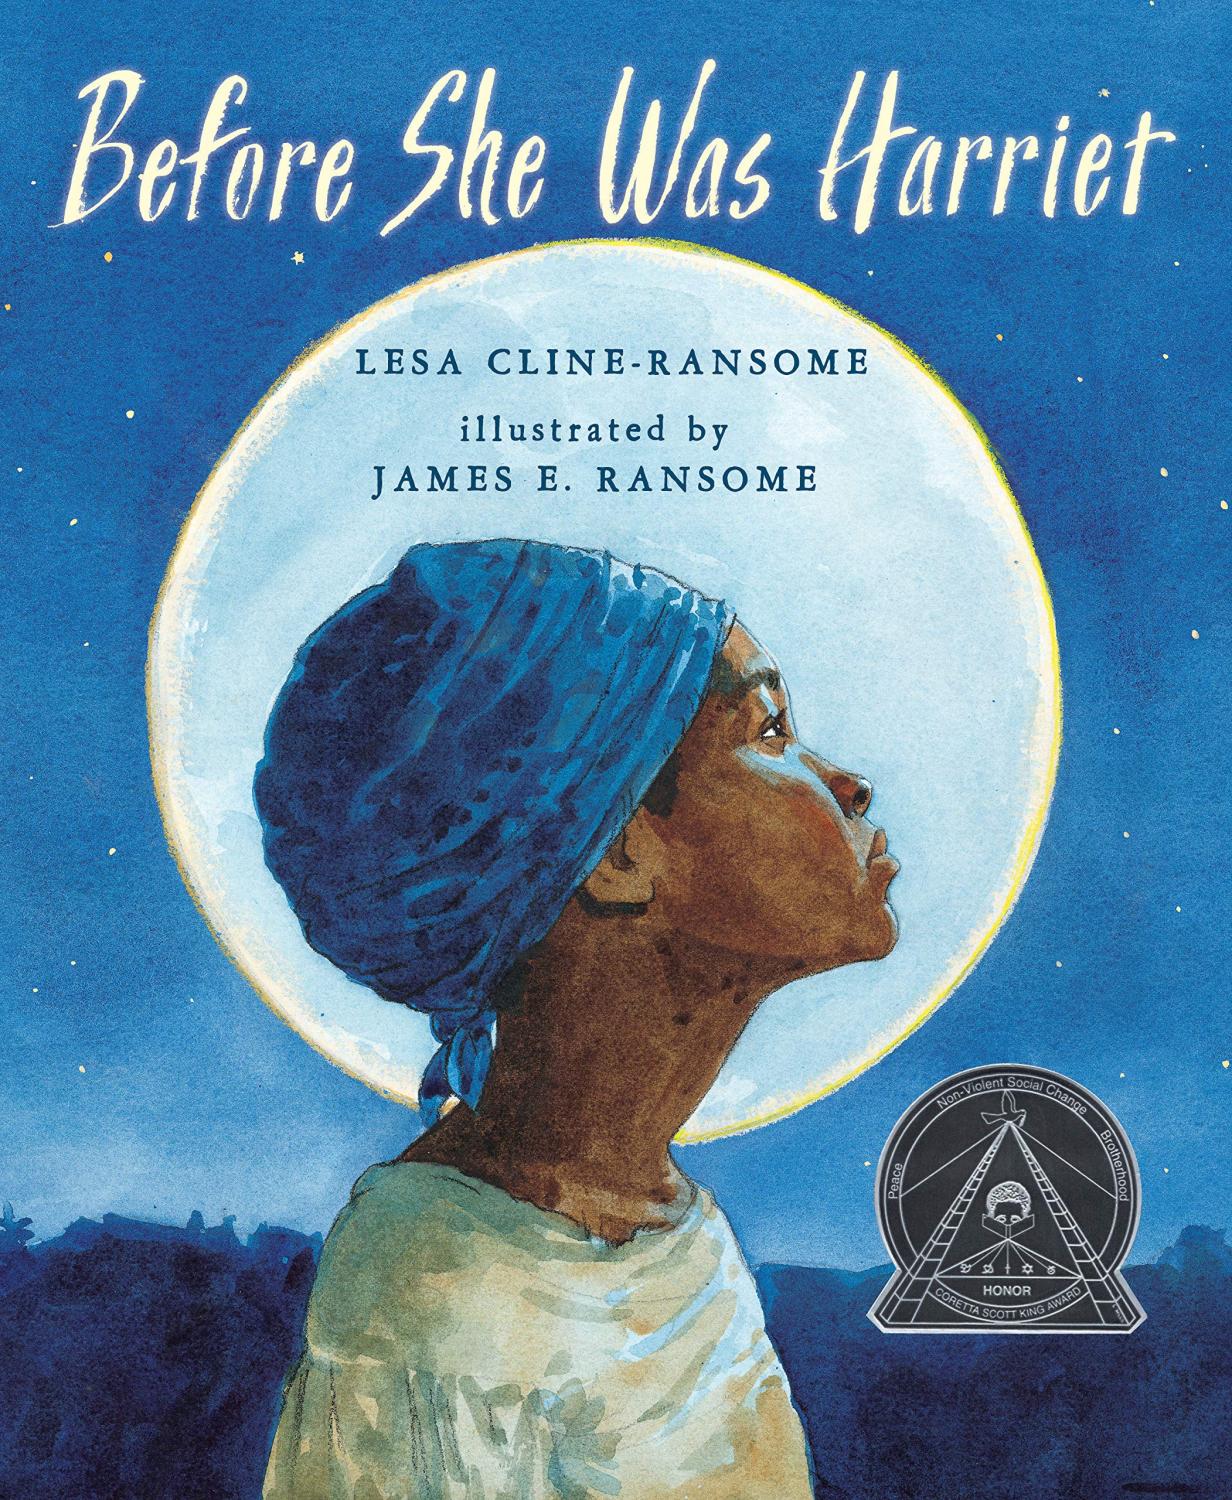 Illustration of a young Harriet Tubman looking up at moon